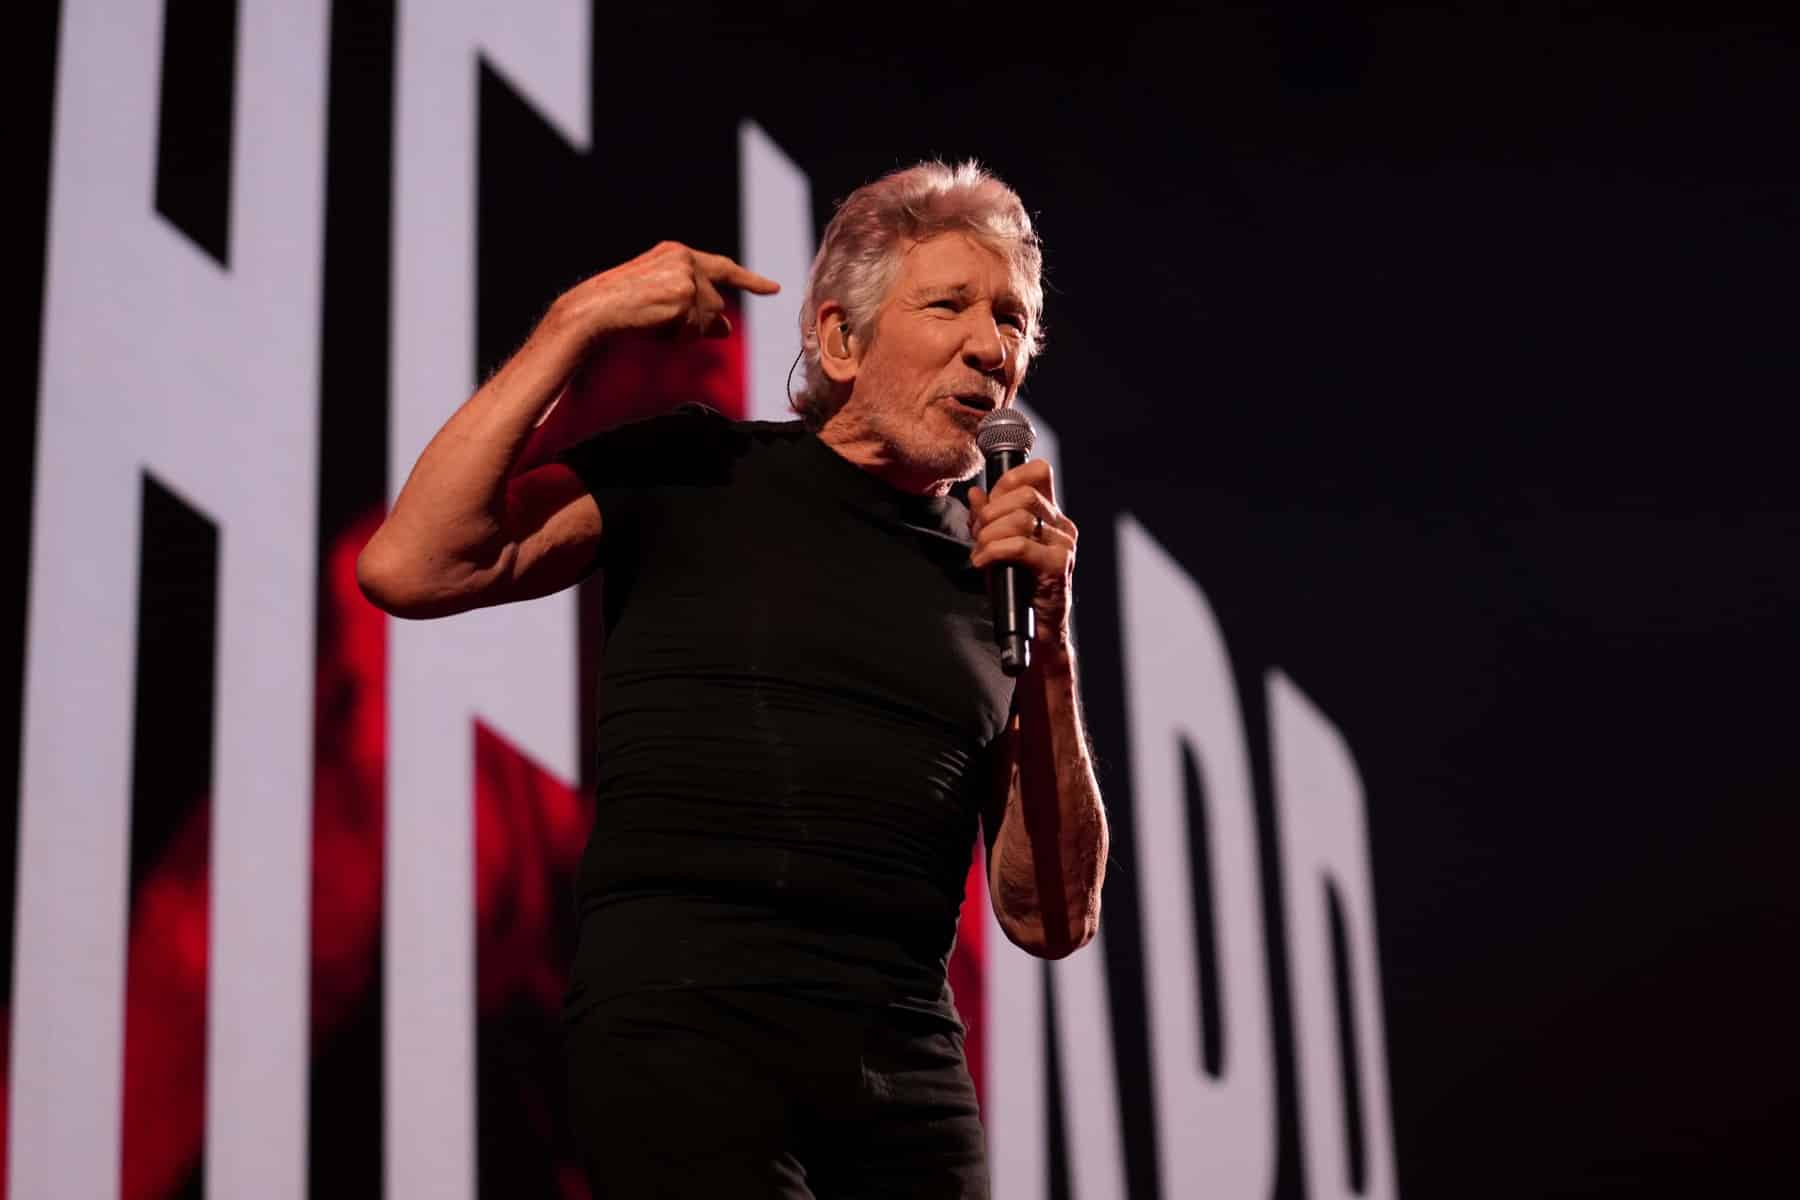 28.05.2023 Roger Waters - This Is Not A Drill Tour 2023 in der Festhalle Frankfurt.